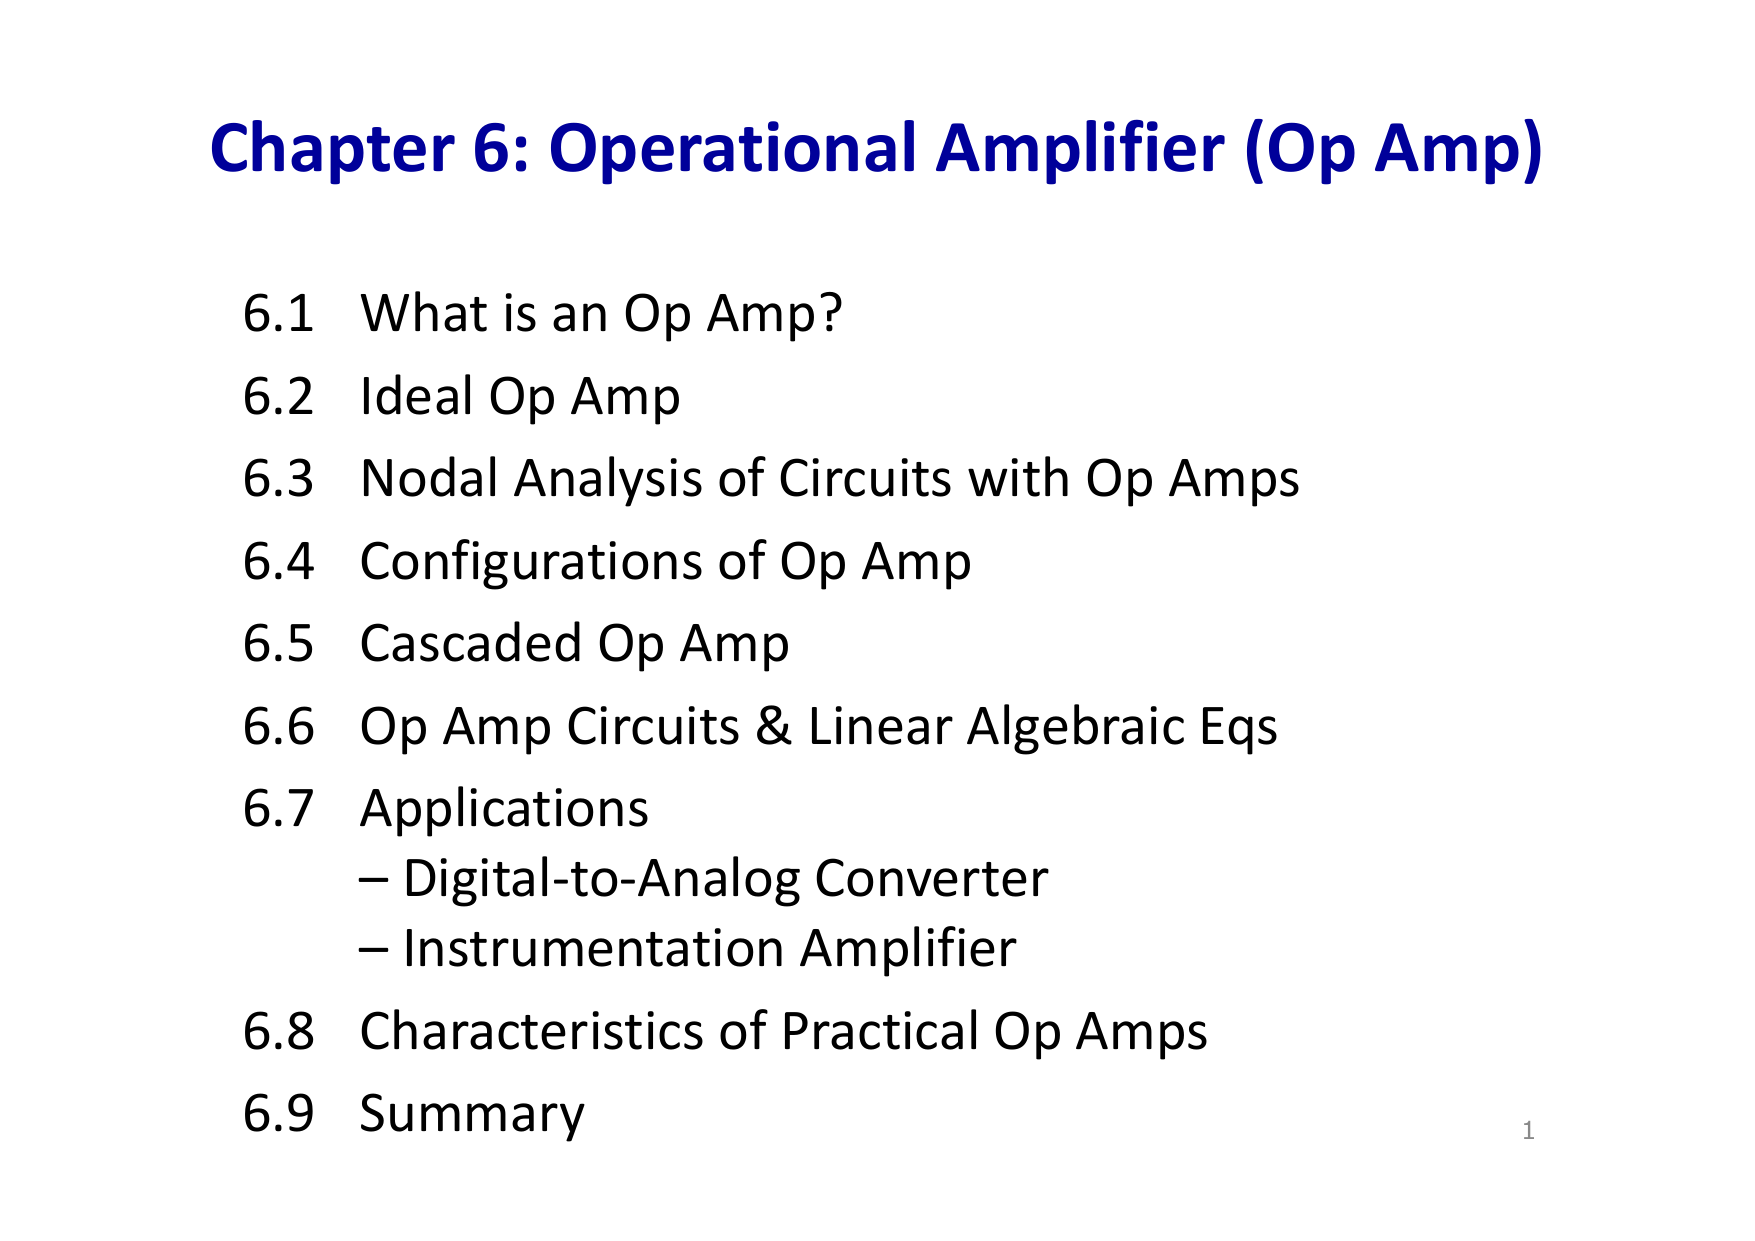 5PCS LM301AH Encapsulation:CAN,Operational Amplifiers